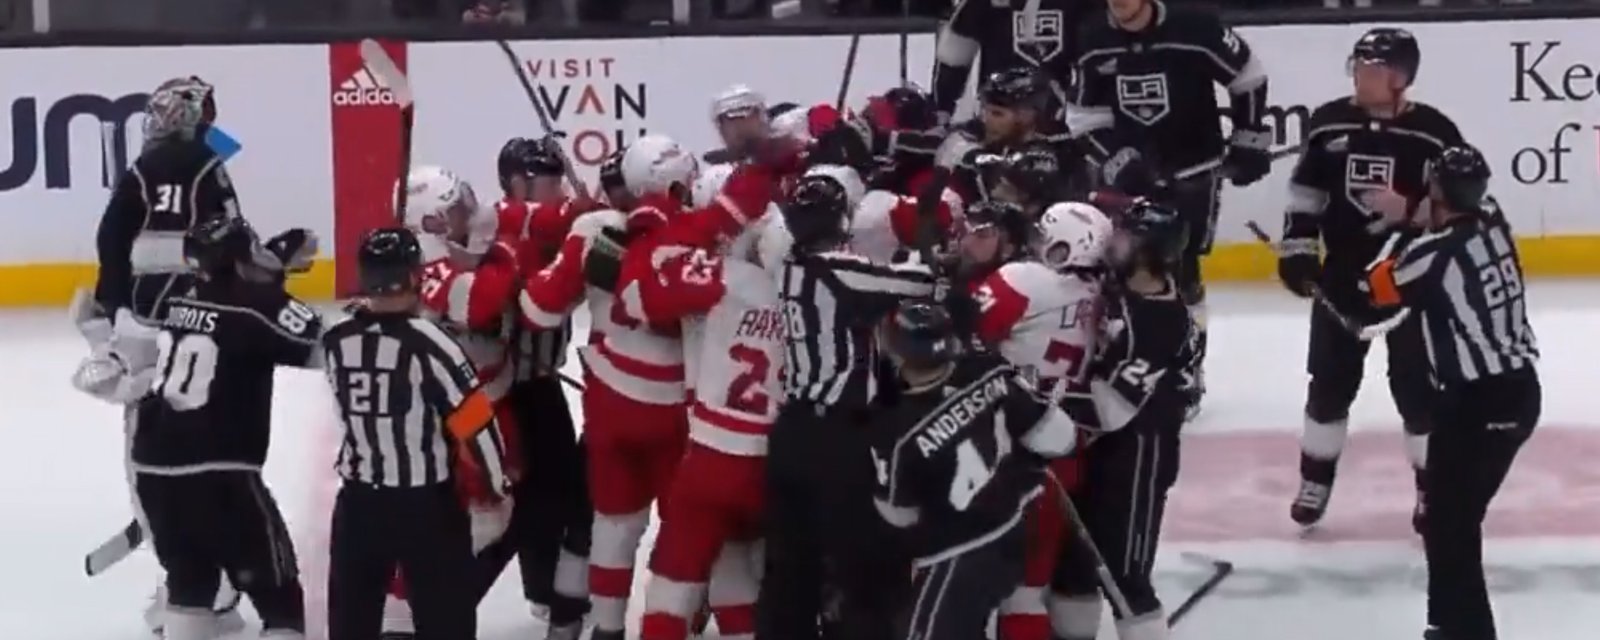 Bench-clearing brawl ensues at the end of period in Wings-Kings game!